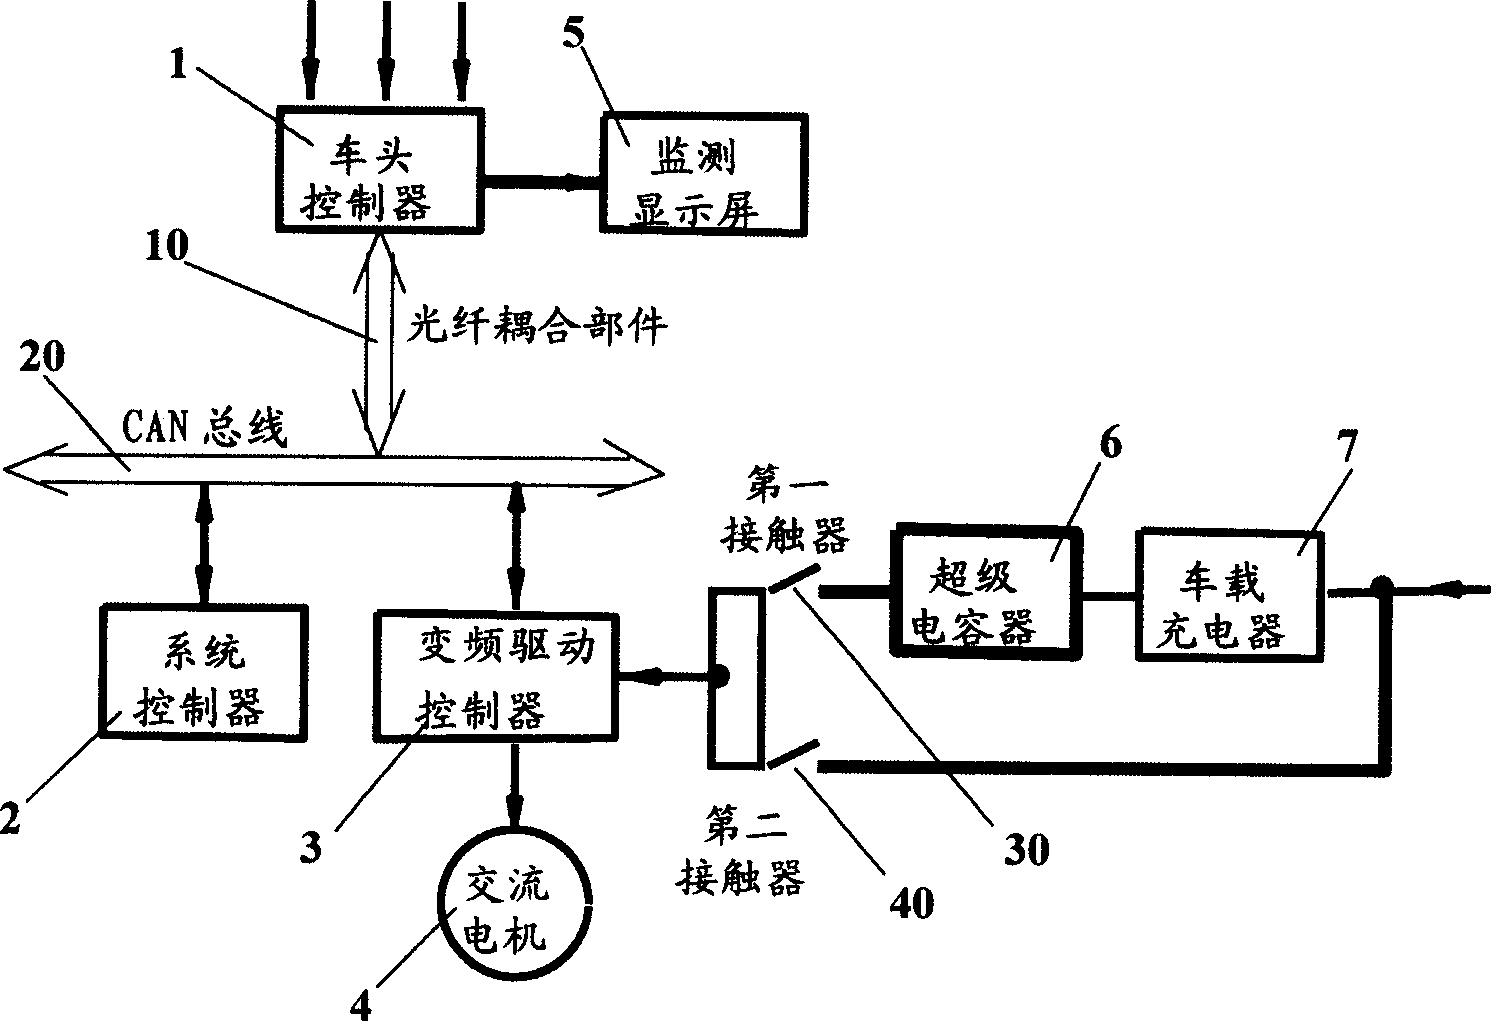 Super capacitor energy accumulating and frequency varying driving electric control system for trolleybus